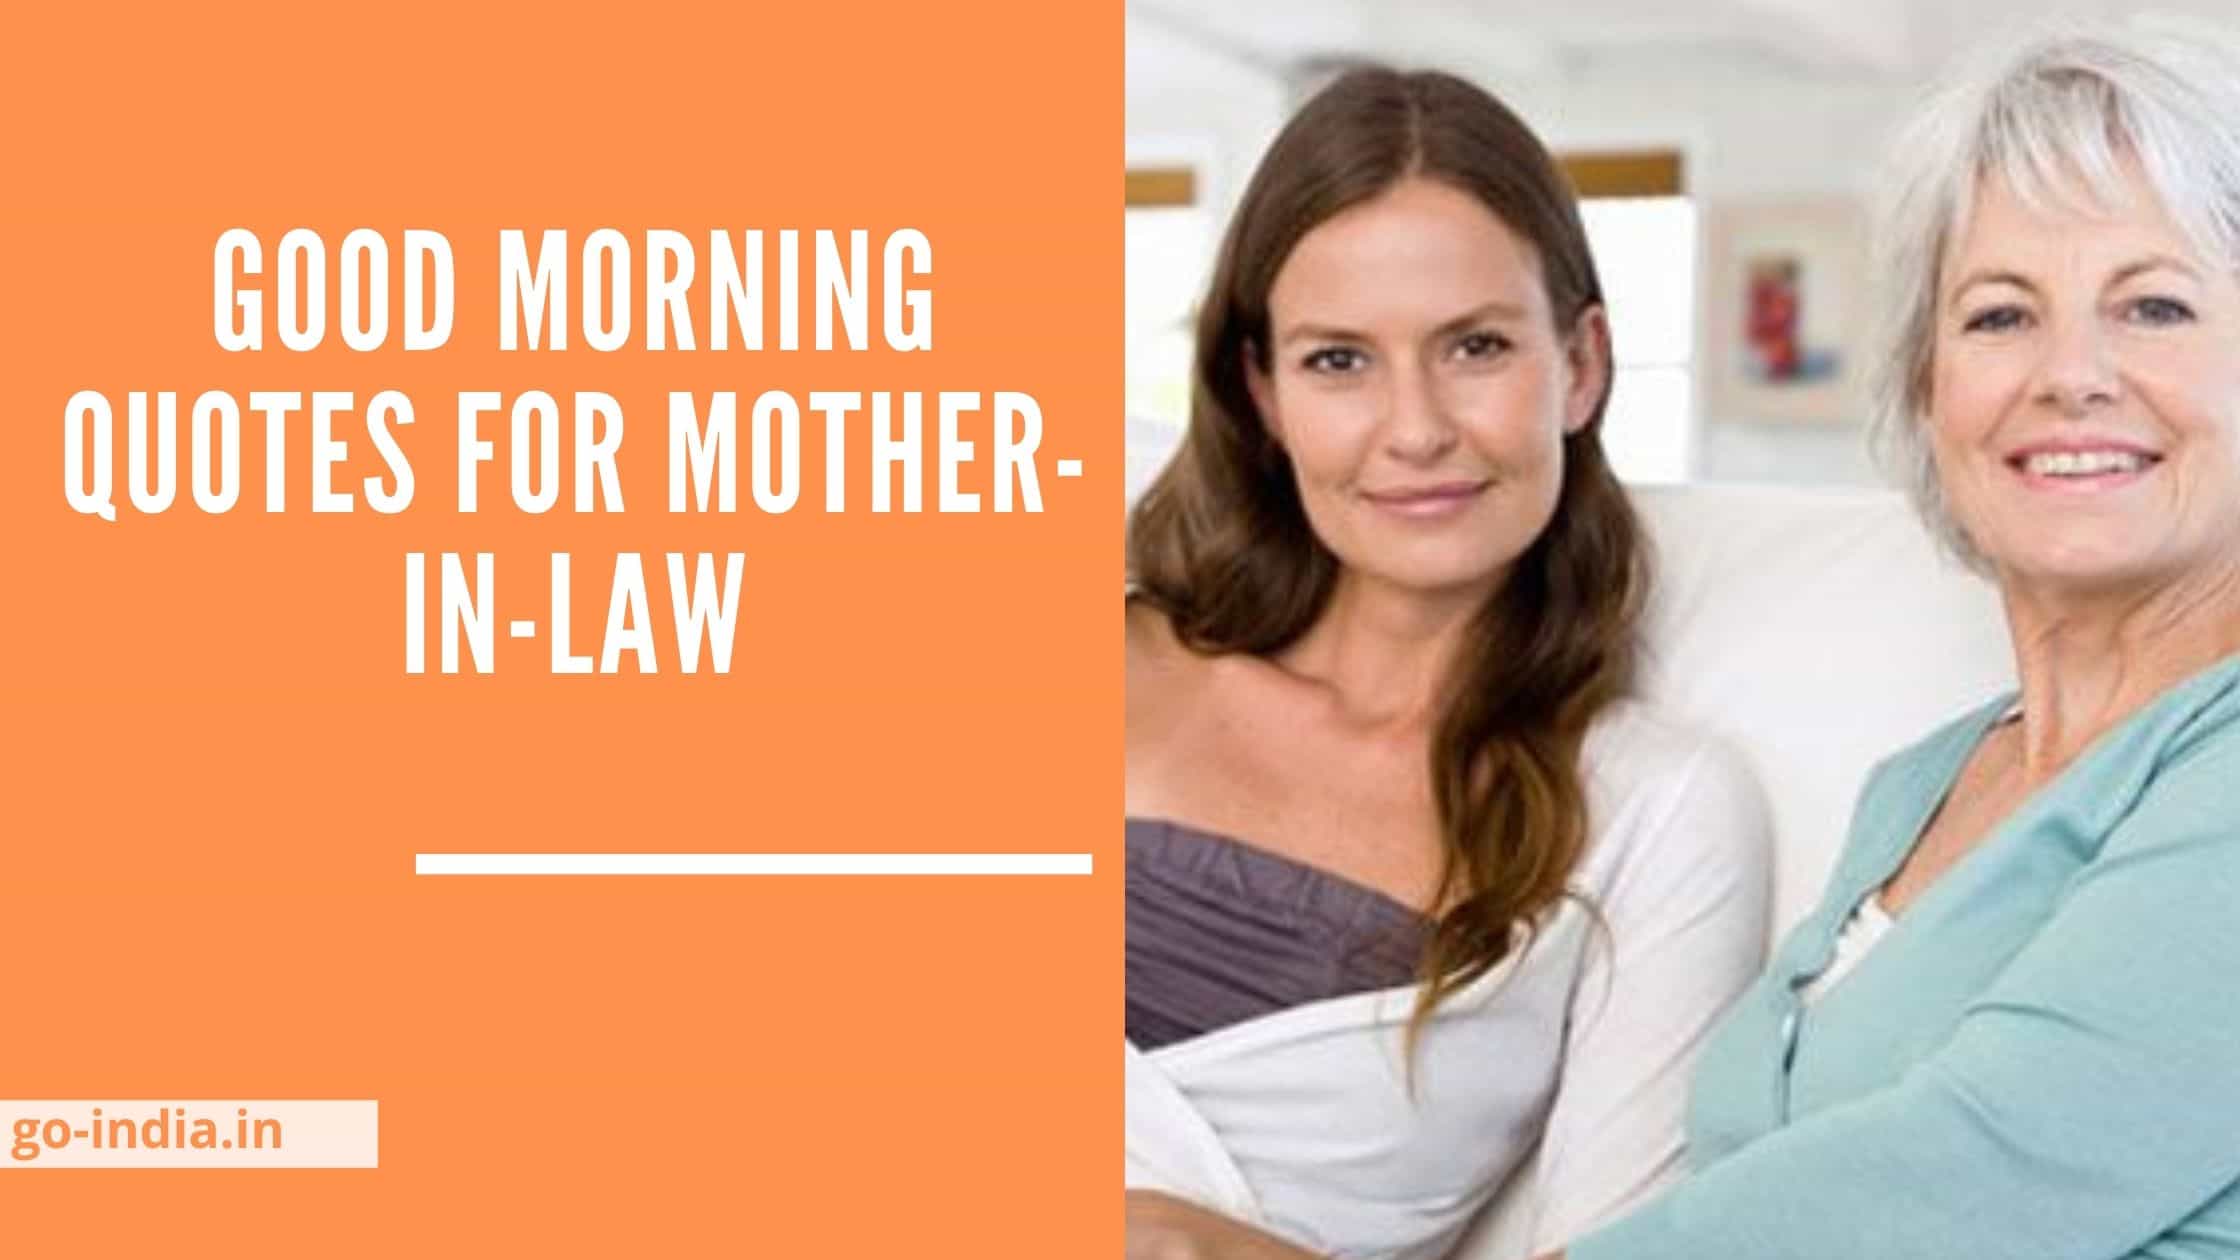 Good Morning Quotes for Mother-in-Law